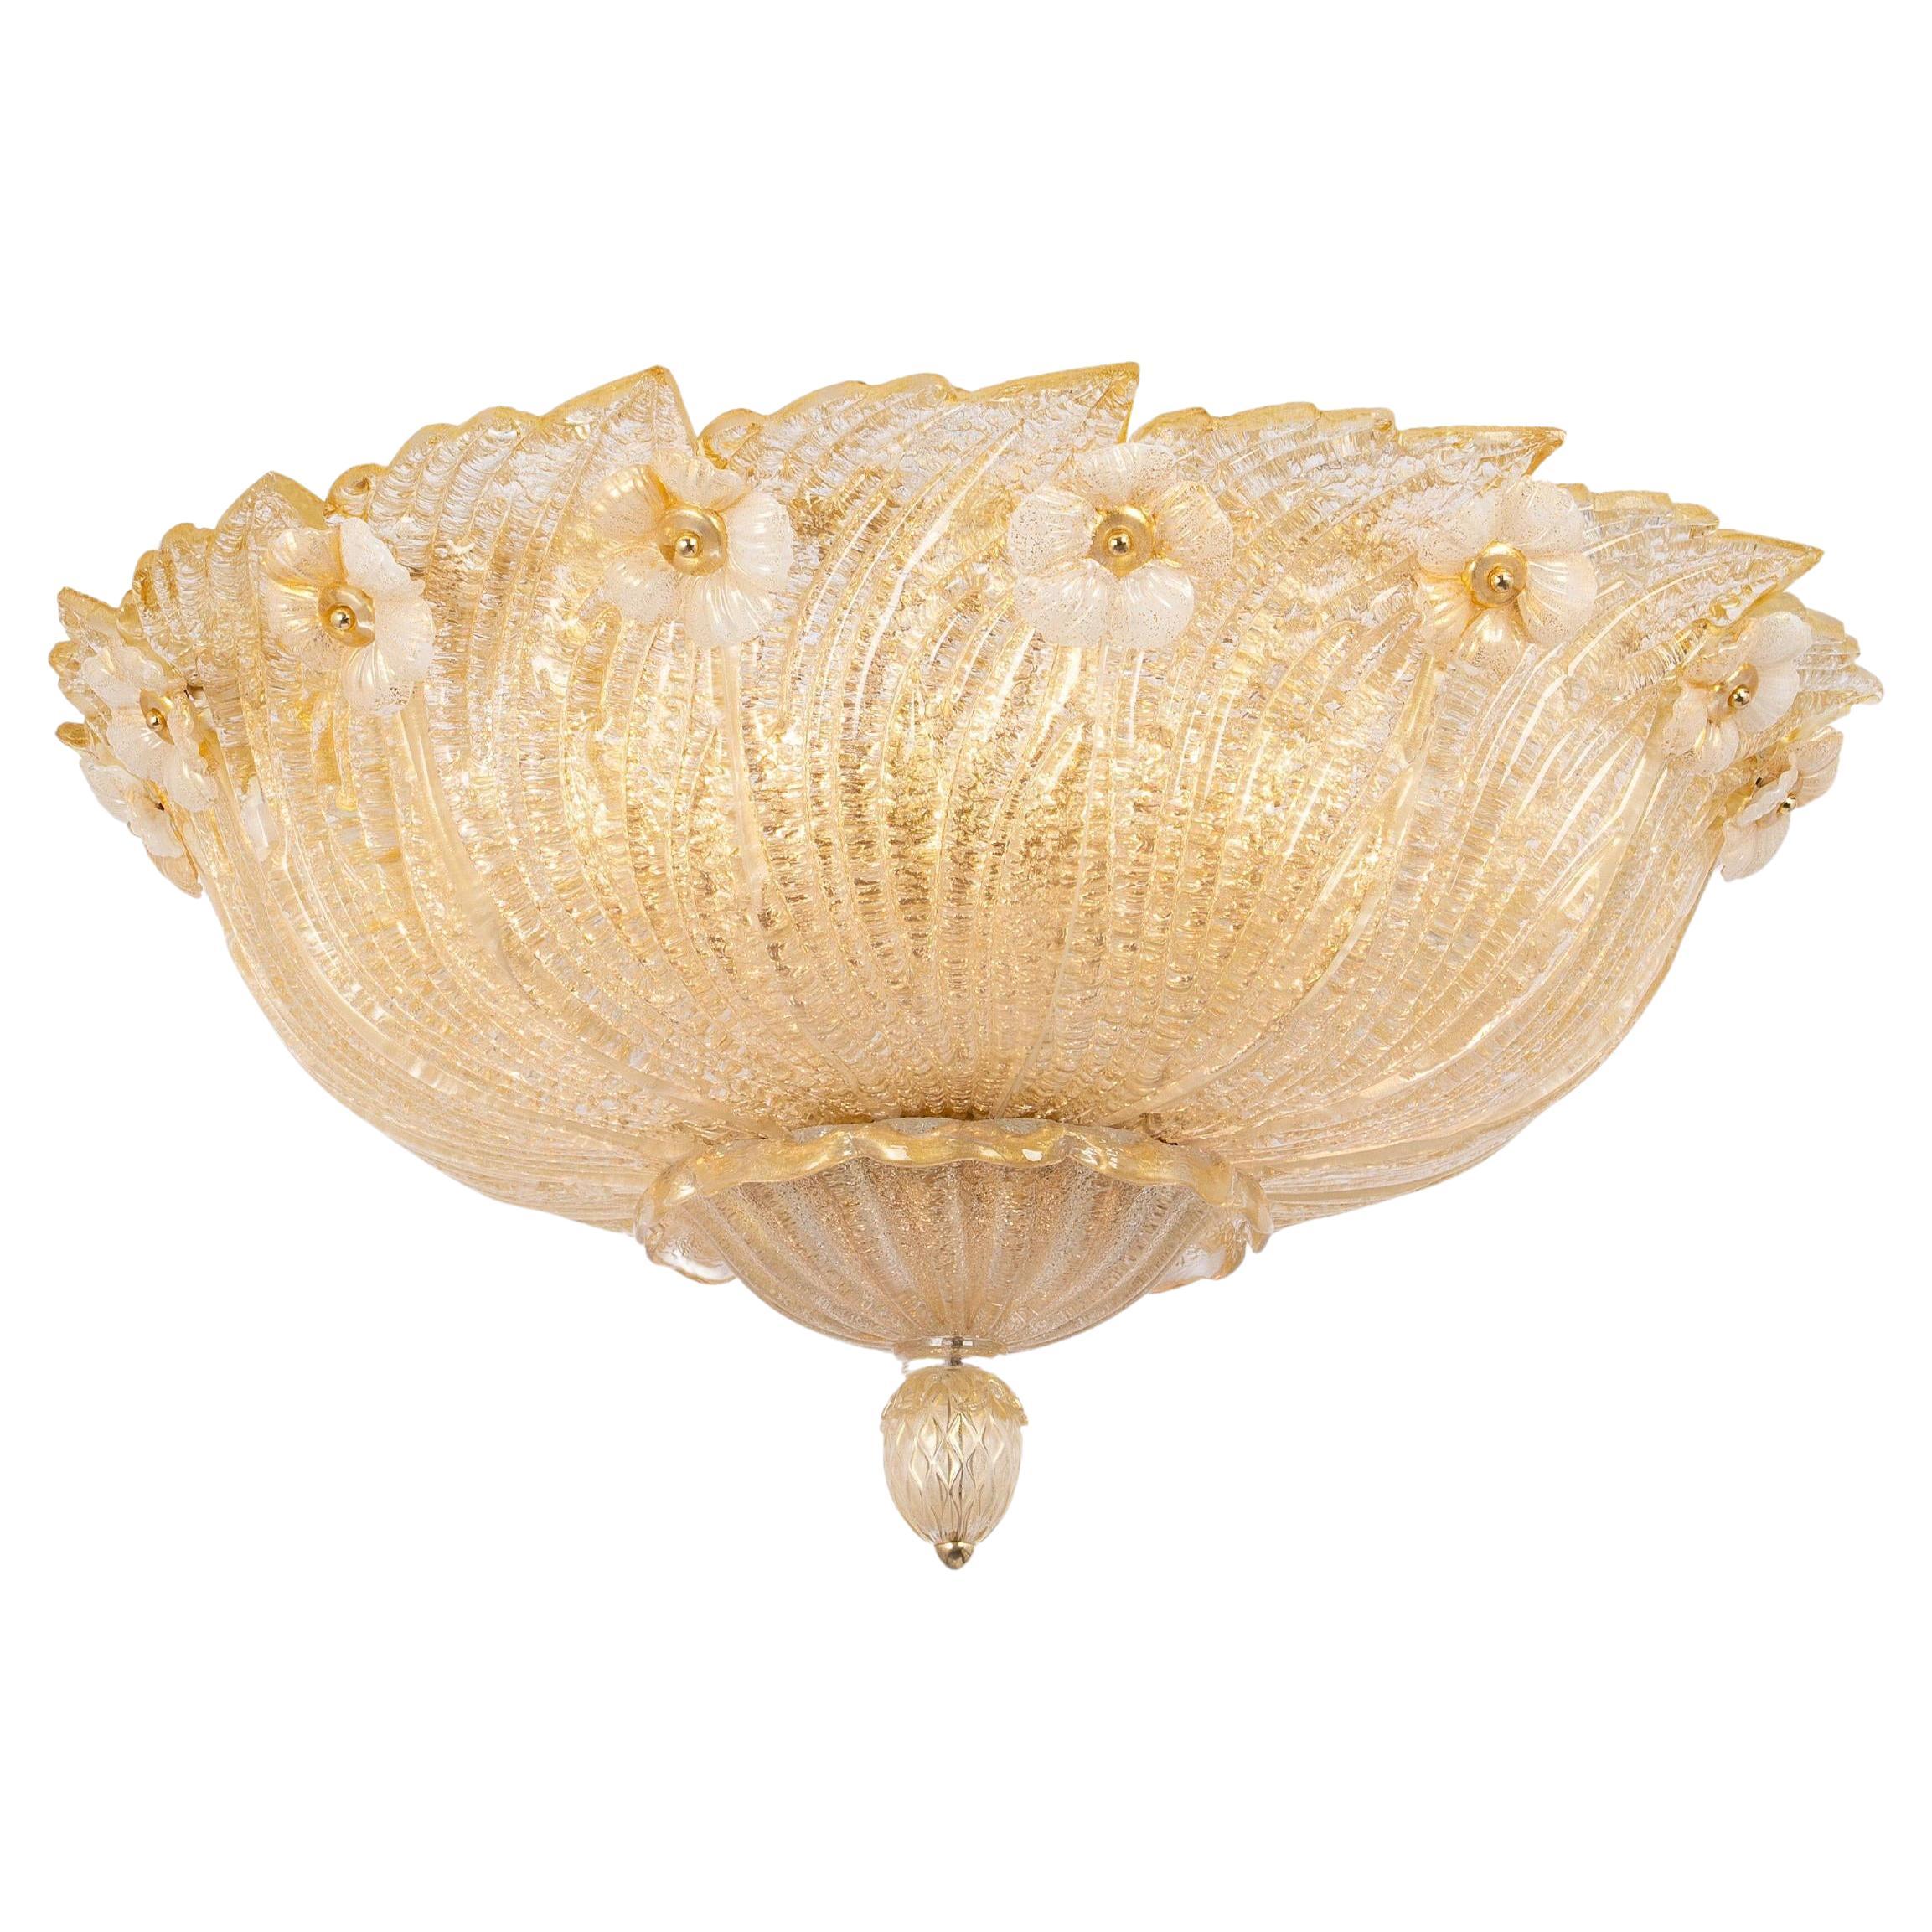 1 of 2 Large Grand Hotel Murano Ceiling Fixture by Barovier & Toso, Italy, 1970s